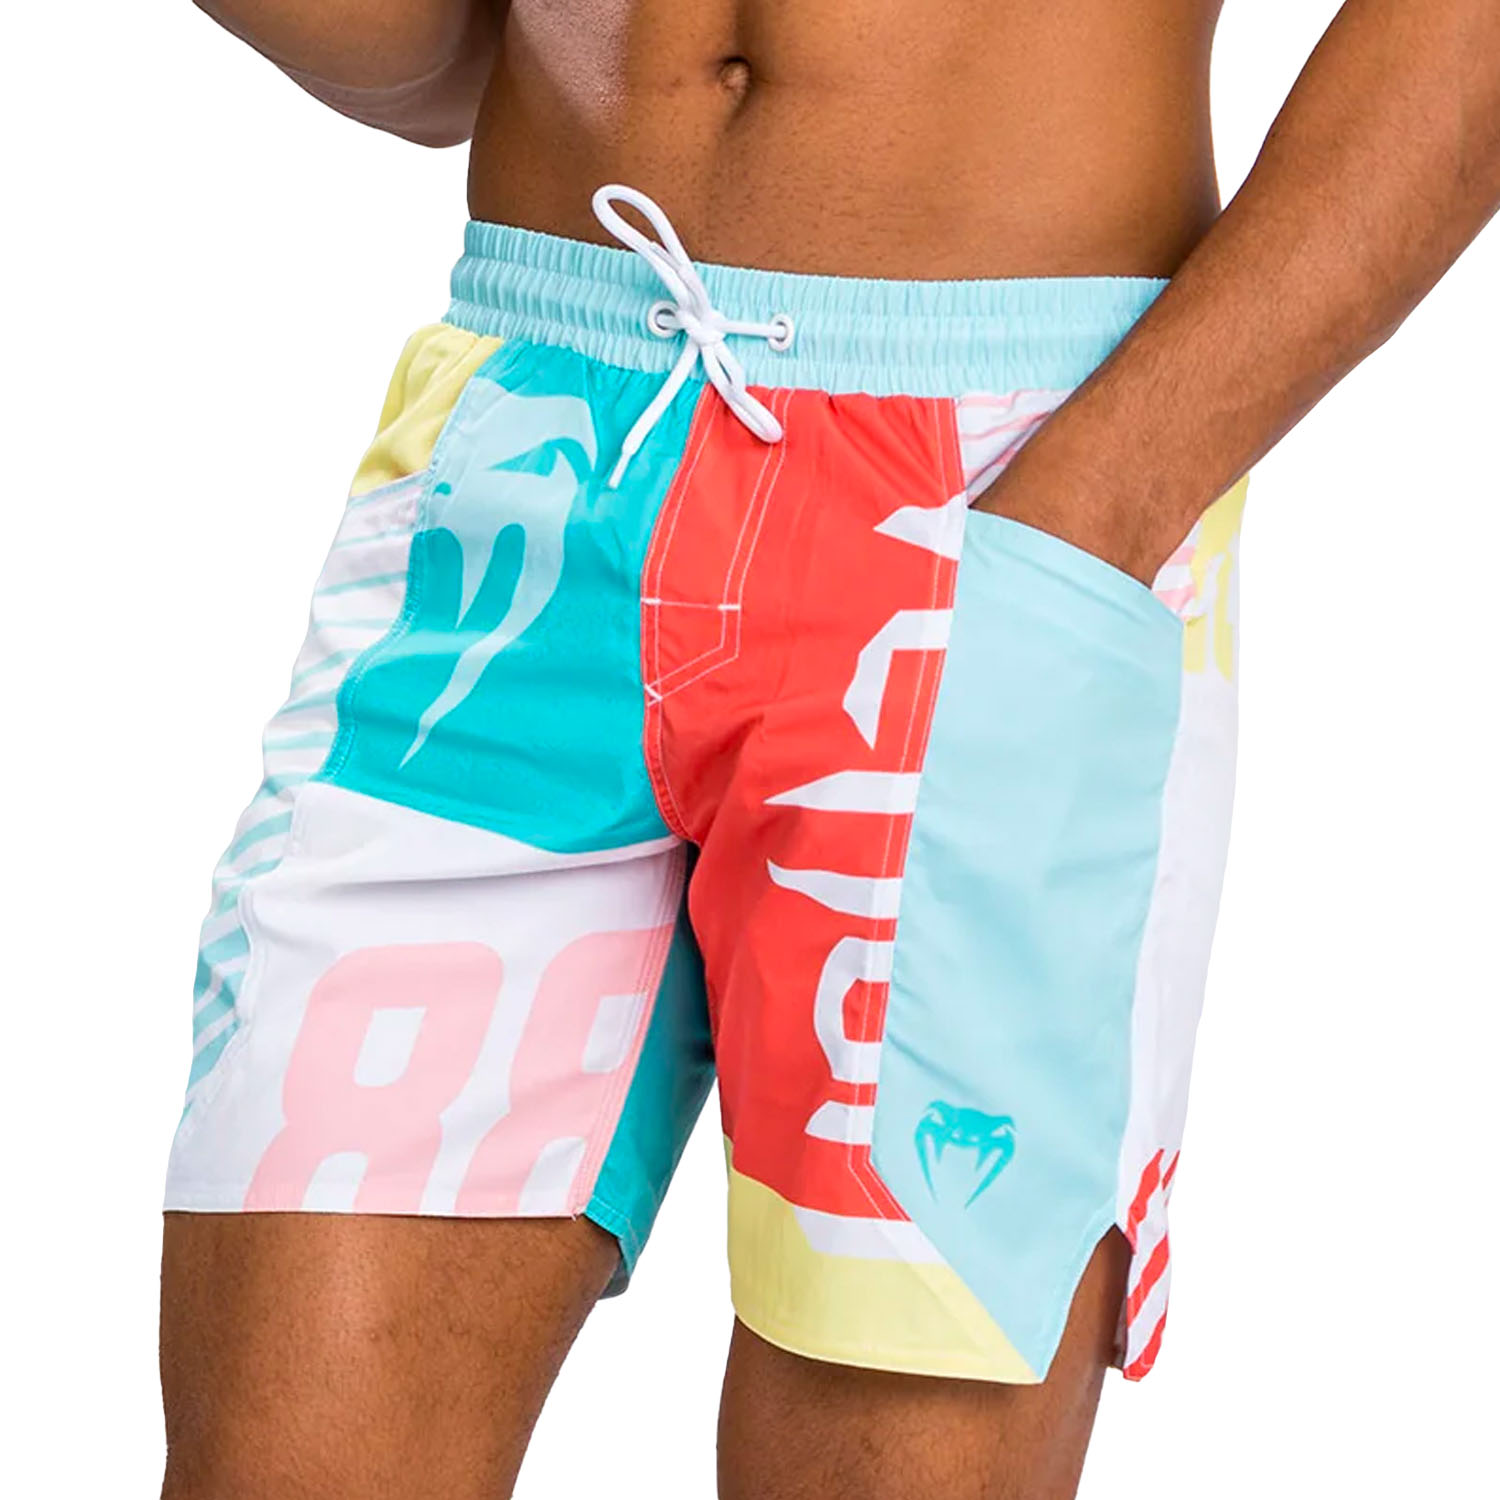 VENUM Board Shorts, Summer 88, Clearwater Blue/Flame Red, S